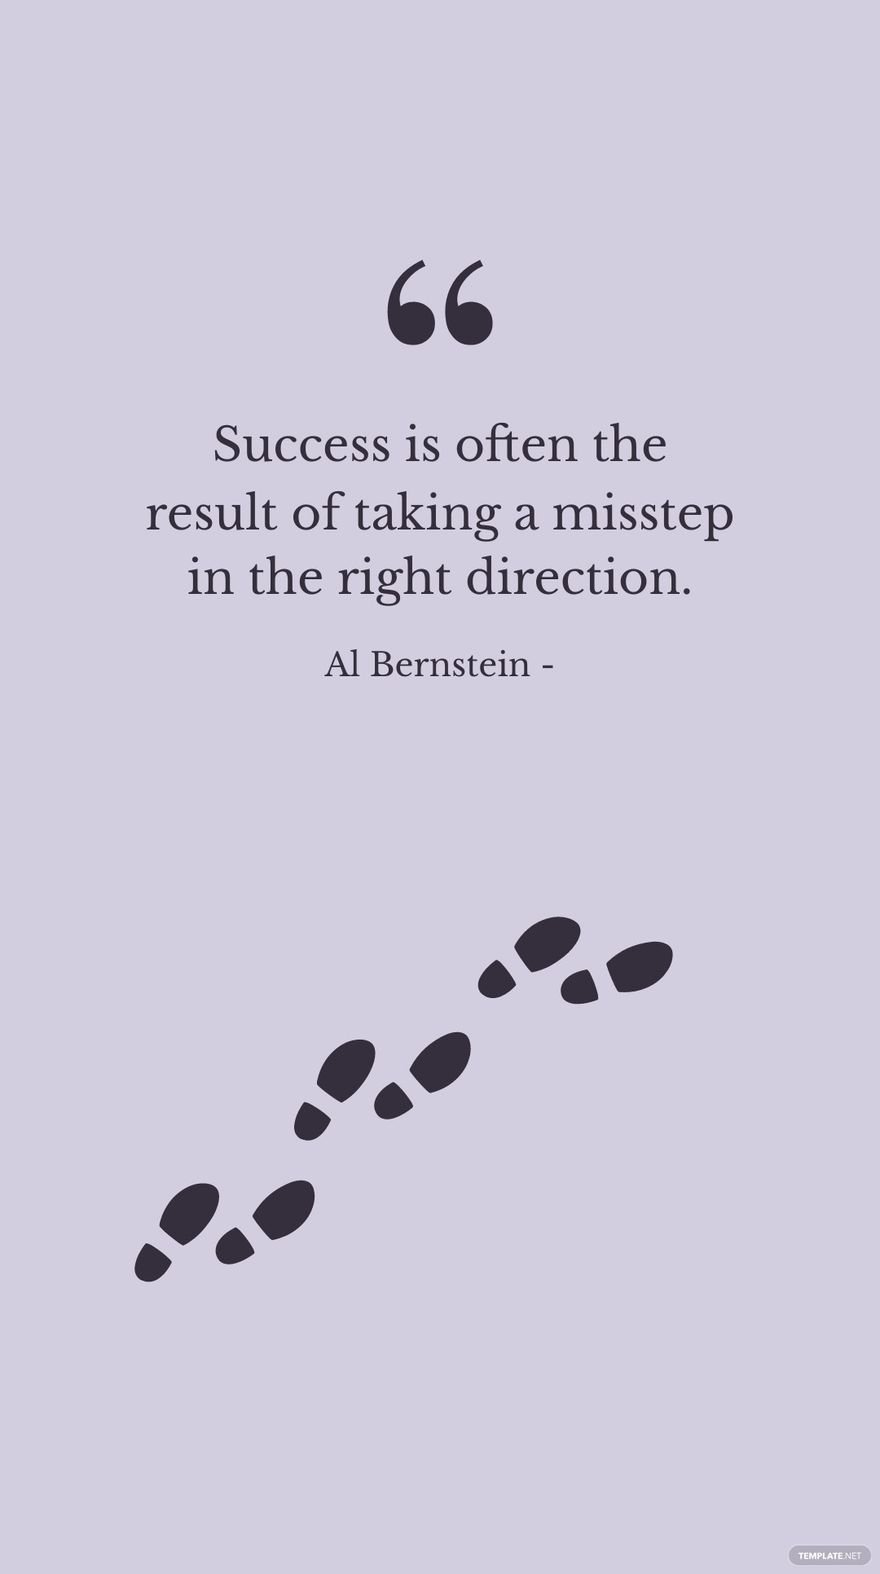 Al Bernstein - Success is often the result of taking a misstep in the right direction.